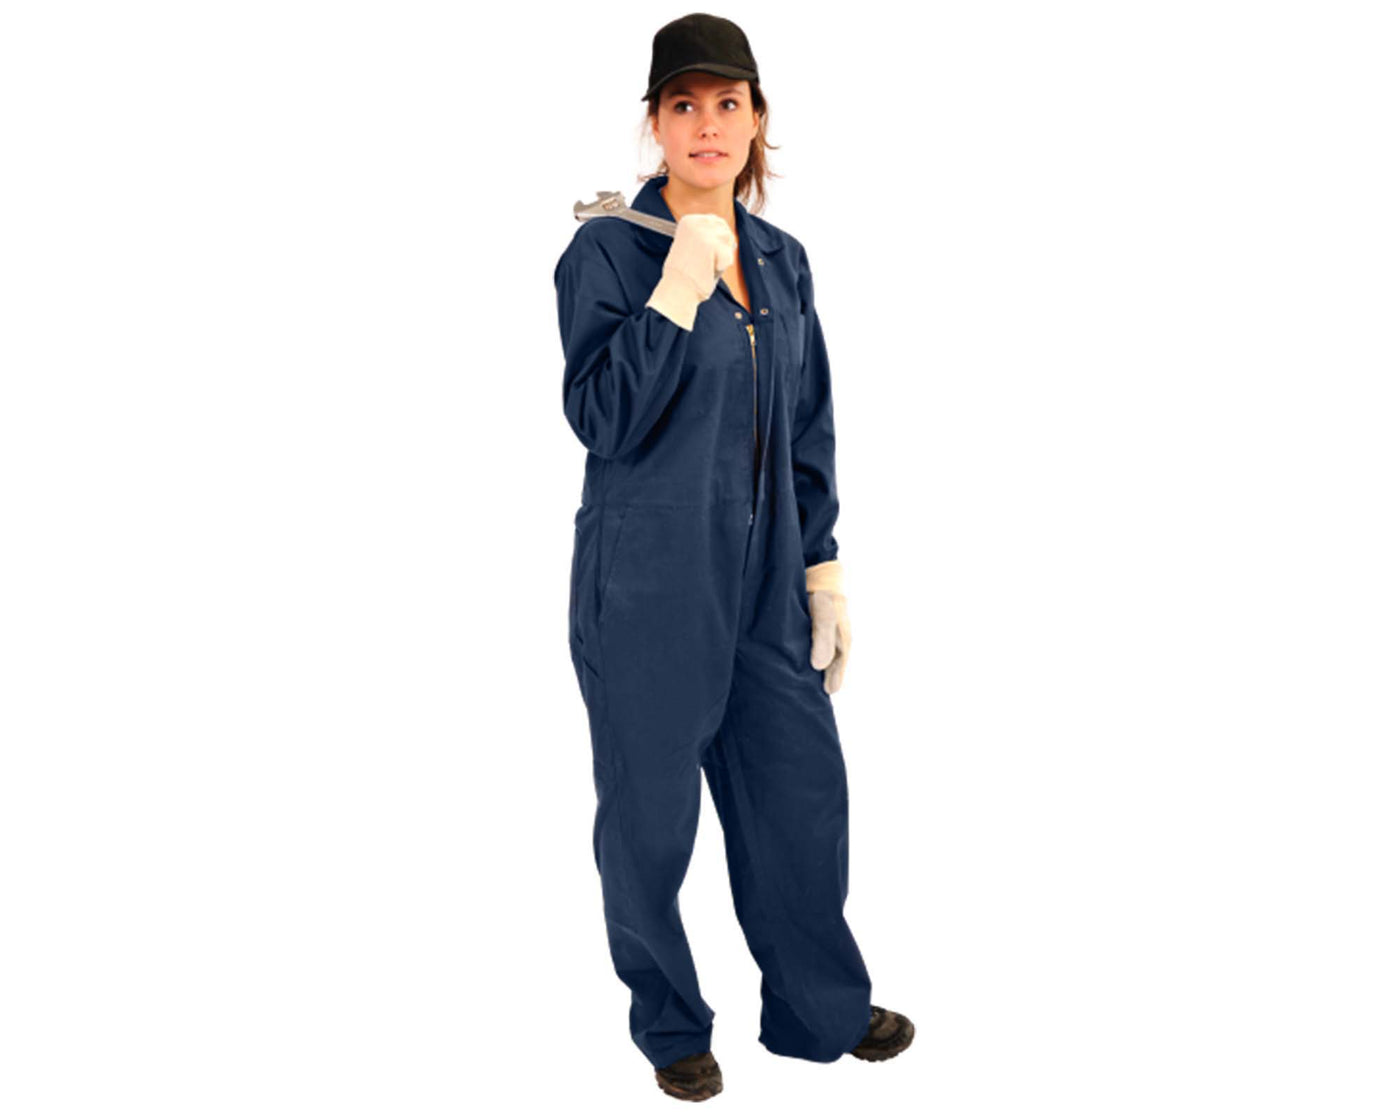 Lady wearing postman blue industrial coverall and wearing black baseball hat